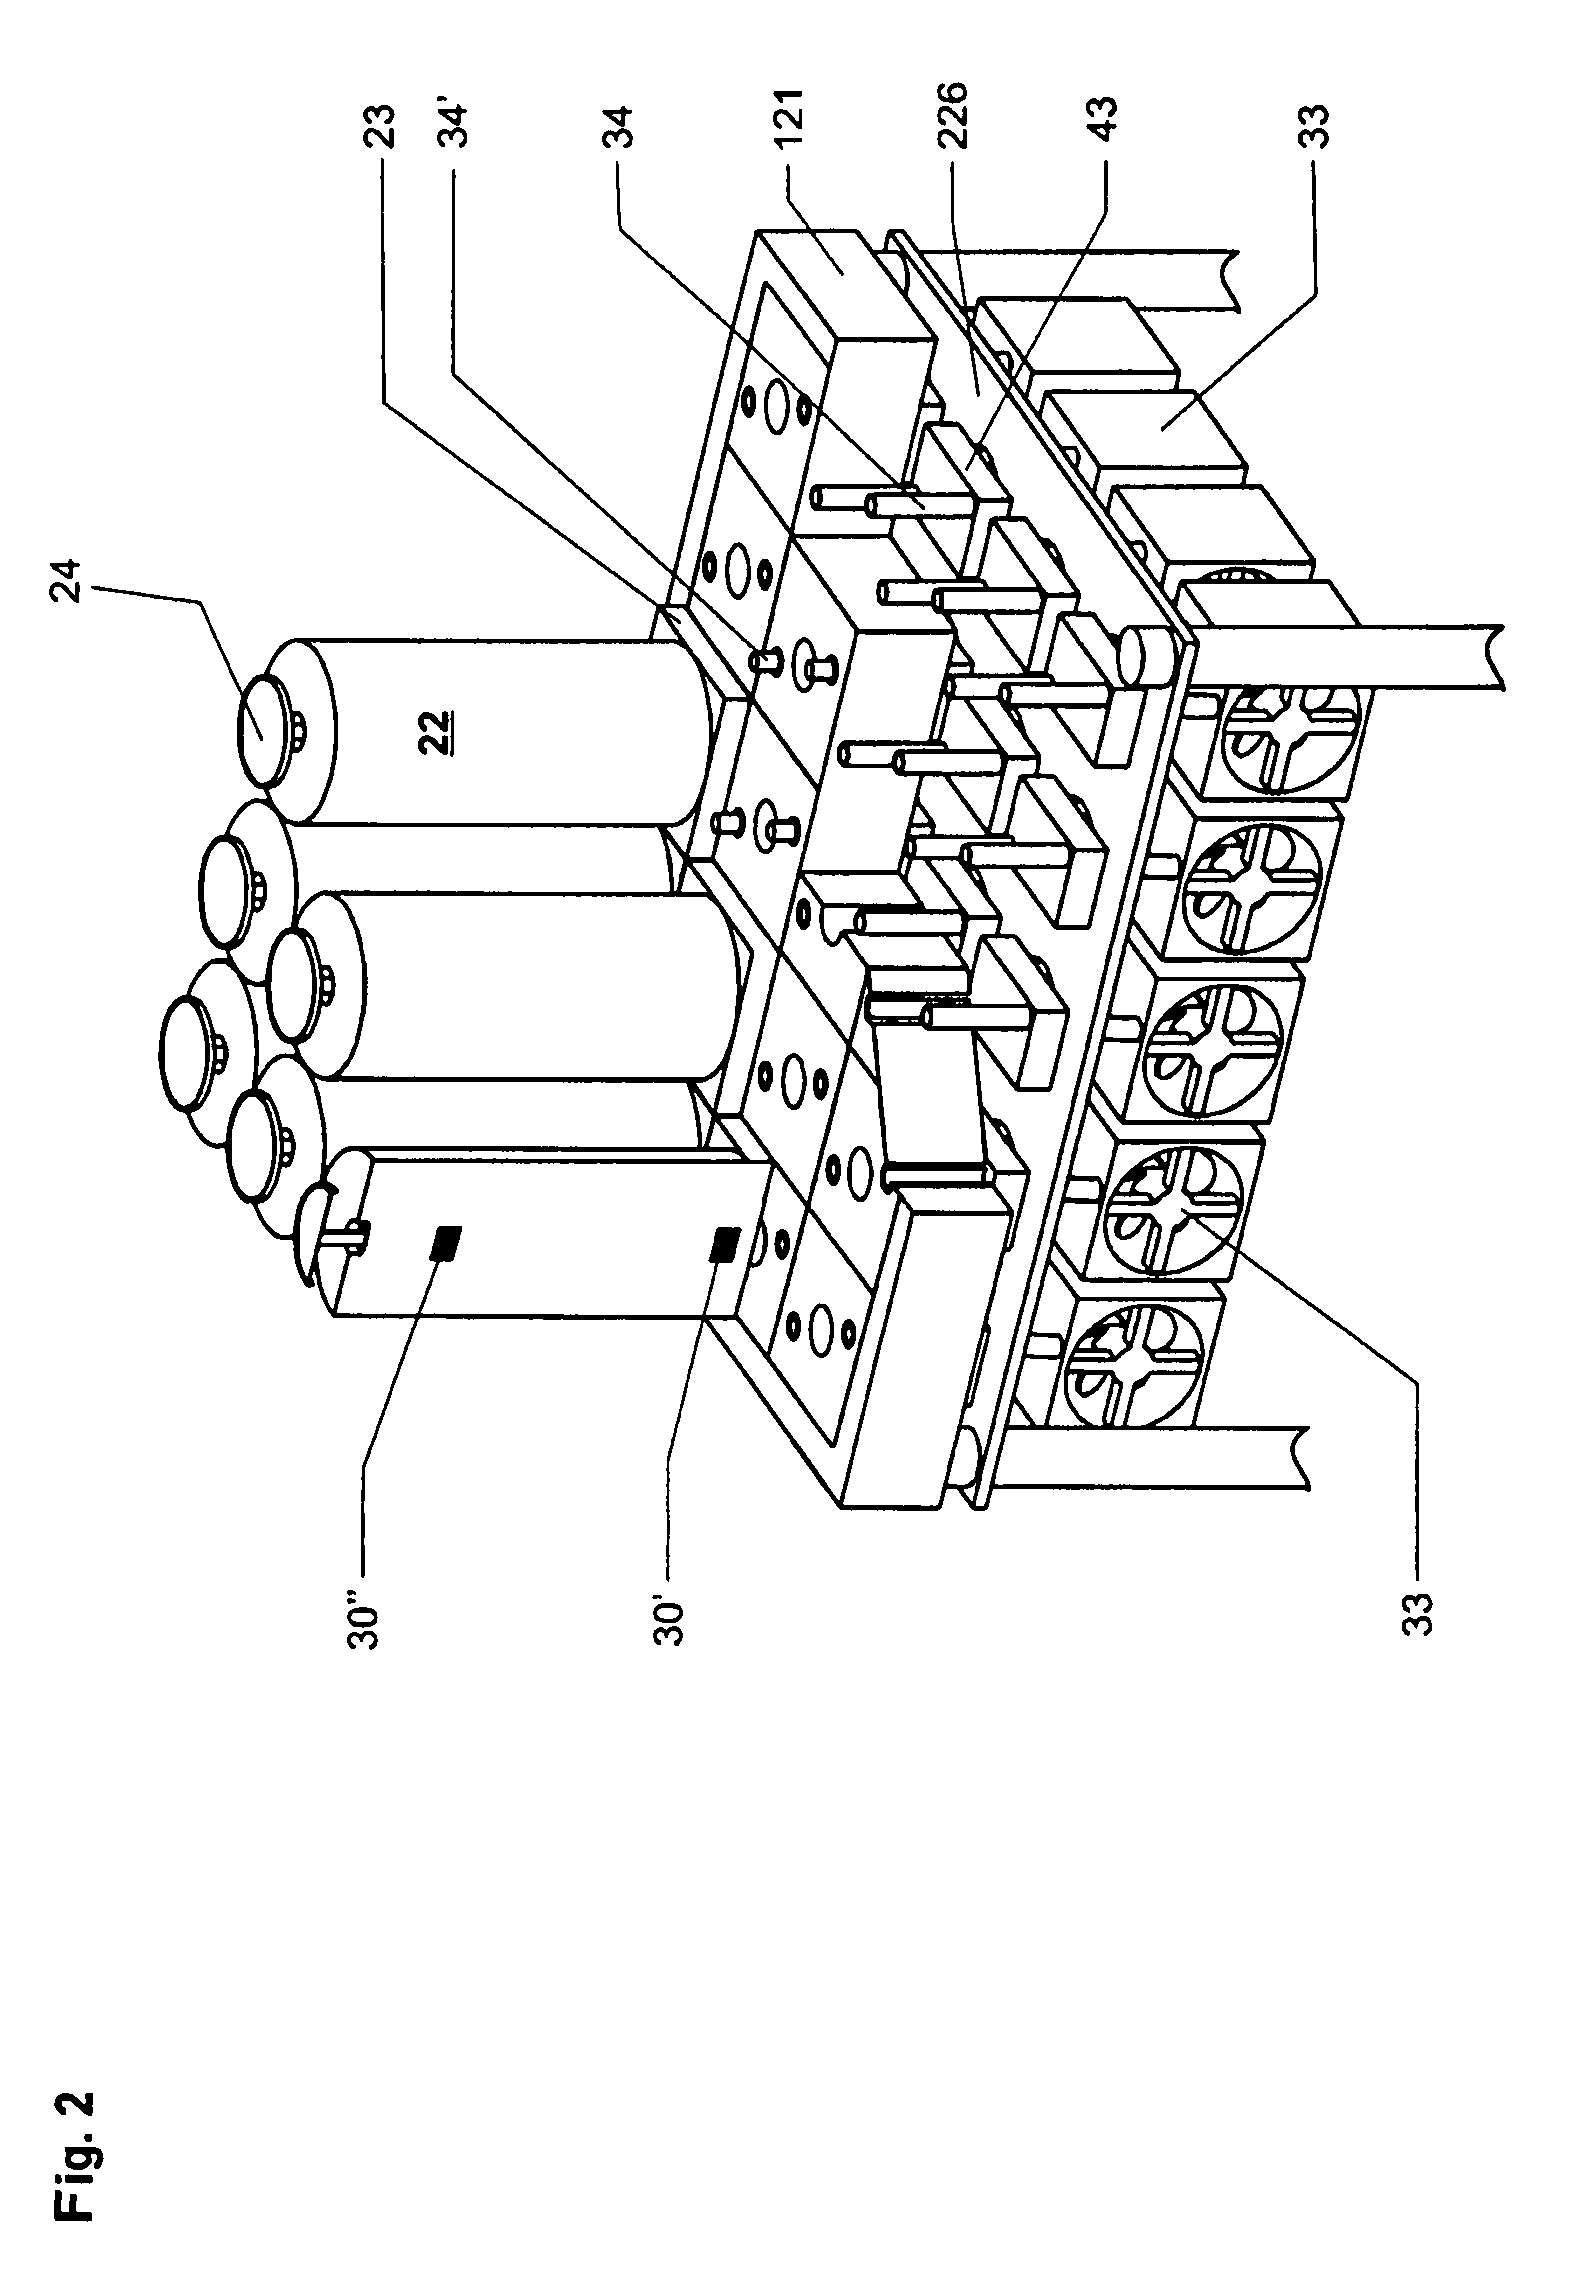 Multi-module weighing system with temperature control